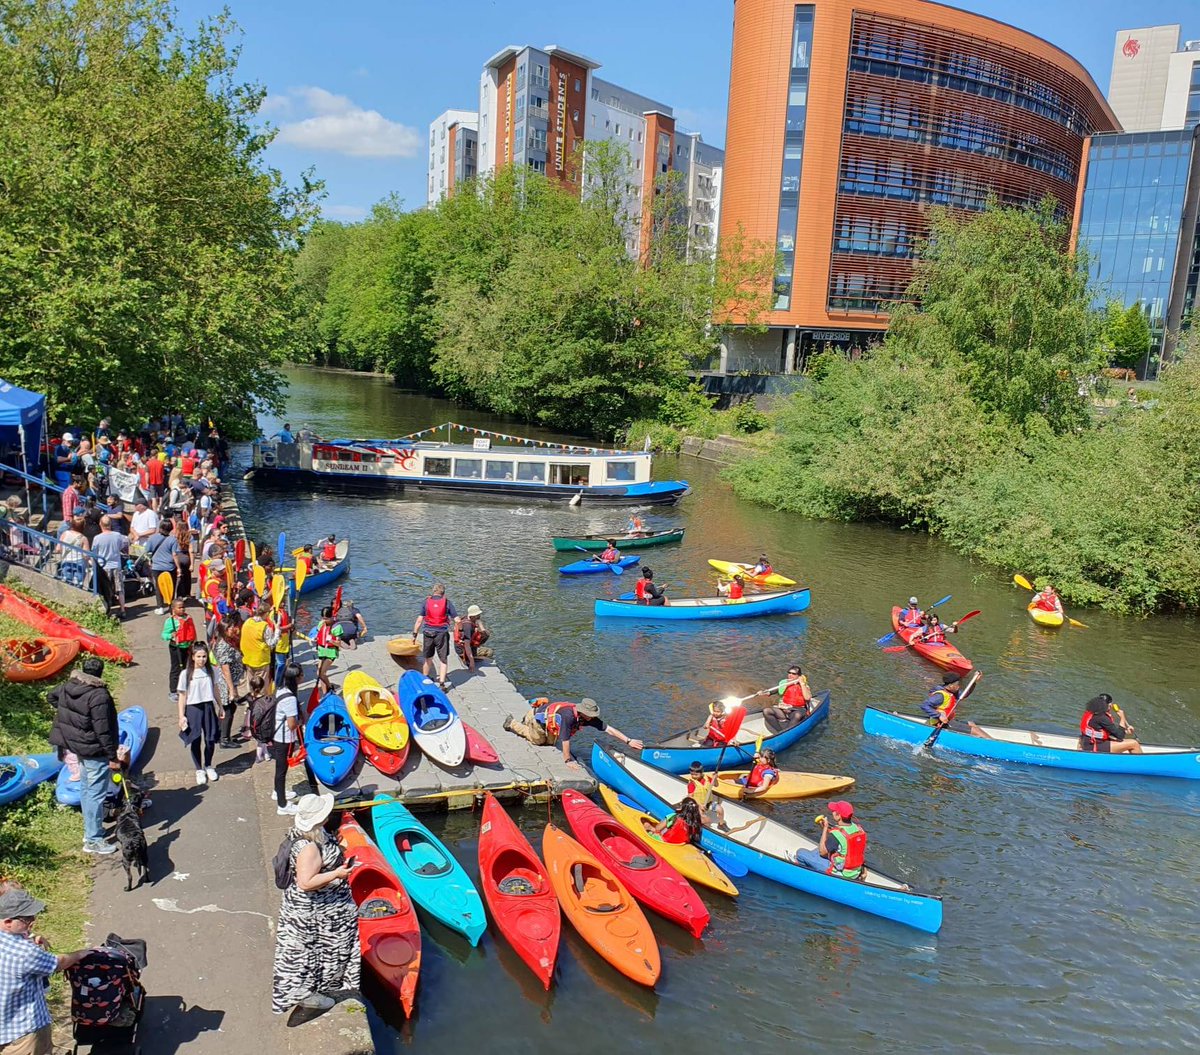 This was the weekend that was. We're all about the Riverside Festival vibes. Thanks to everyone who came along!

#summer #festival #boats #river #Riverside #leicester #visitleicester